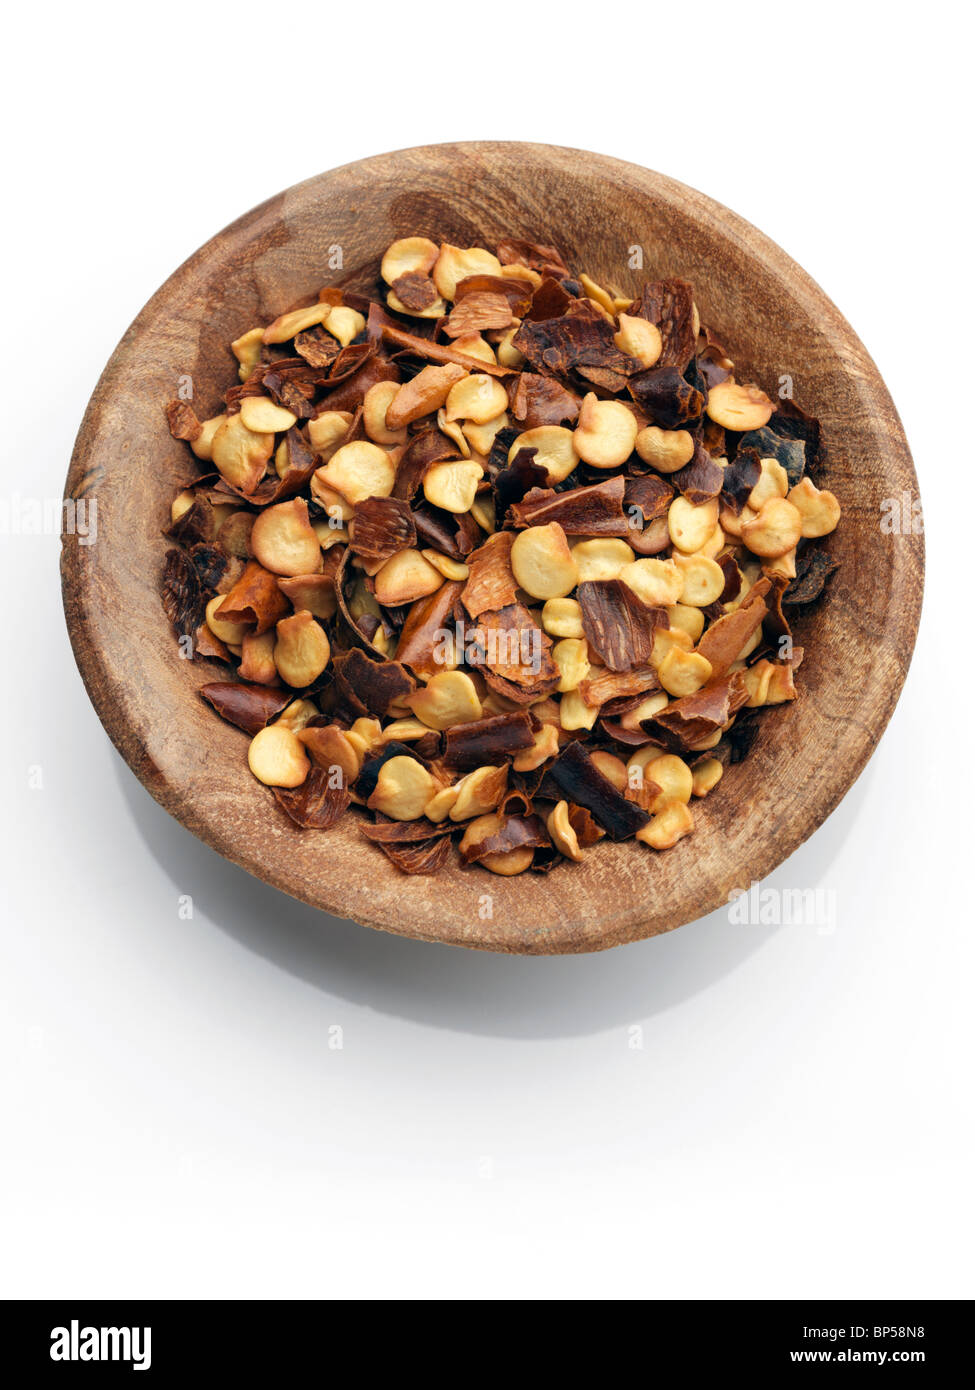 A wooden bowl of crushed chillies on a white background Stock Photo